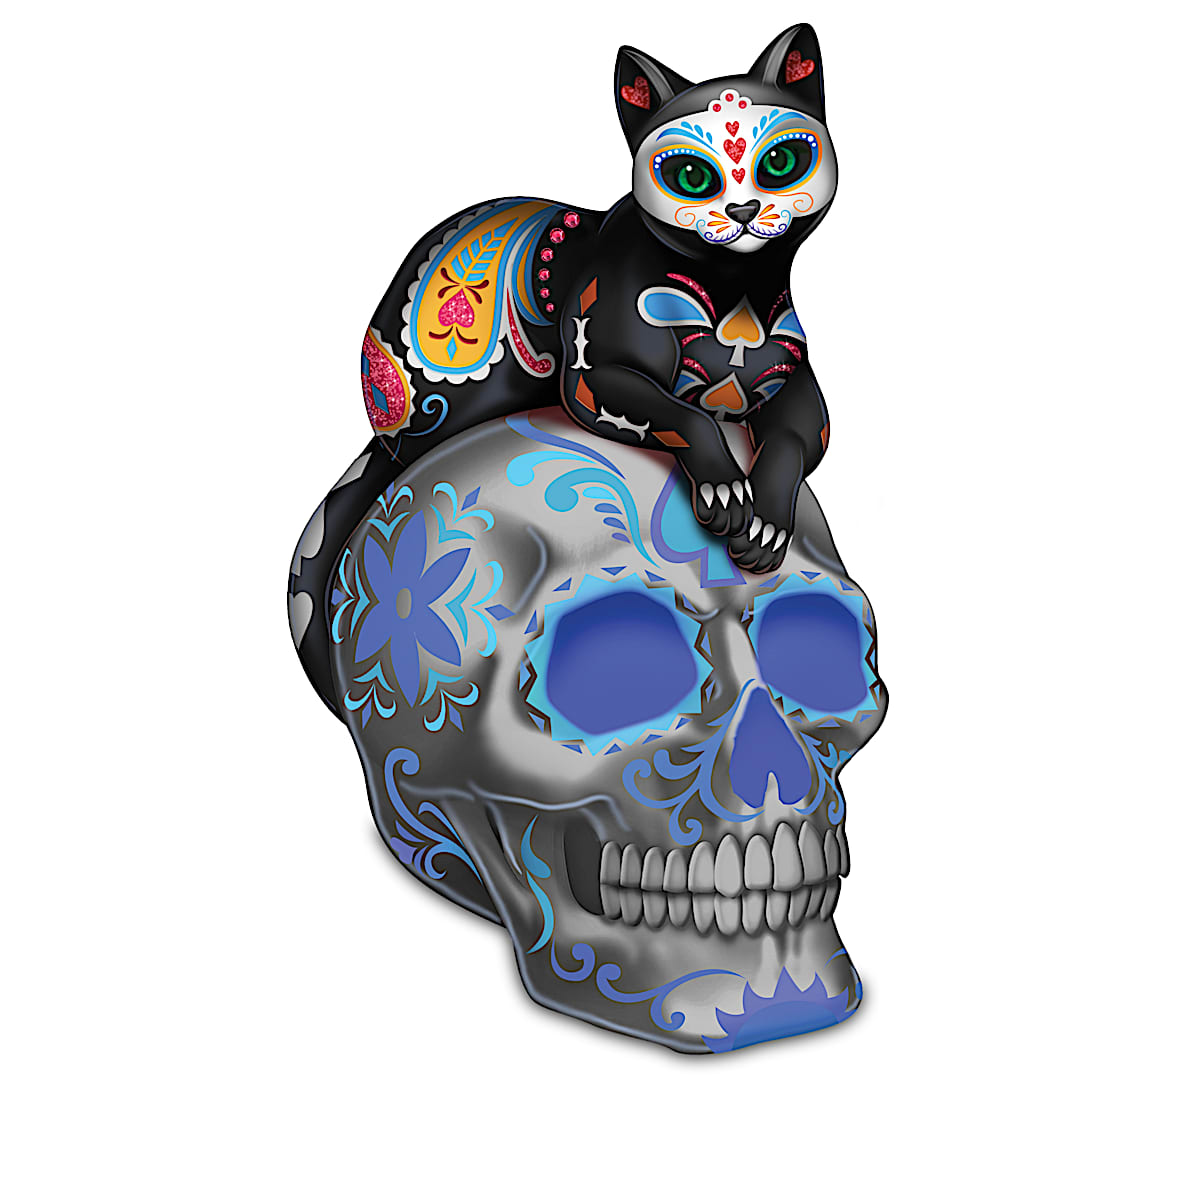 Day Of The Dead Sugar Skull Cat Figurine Collection